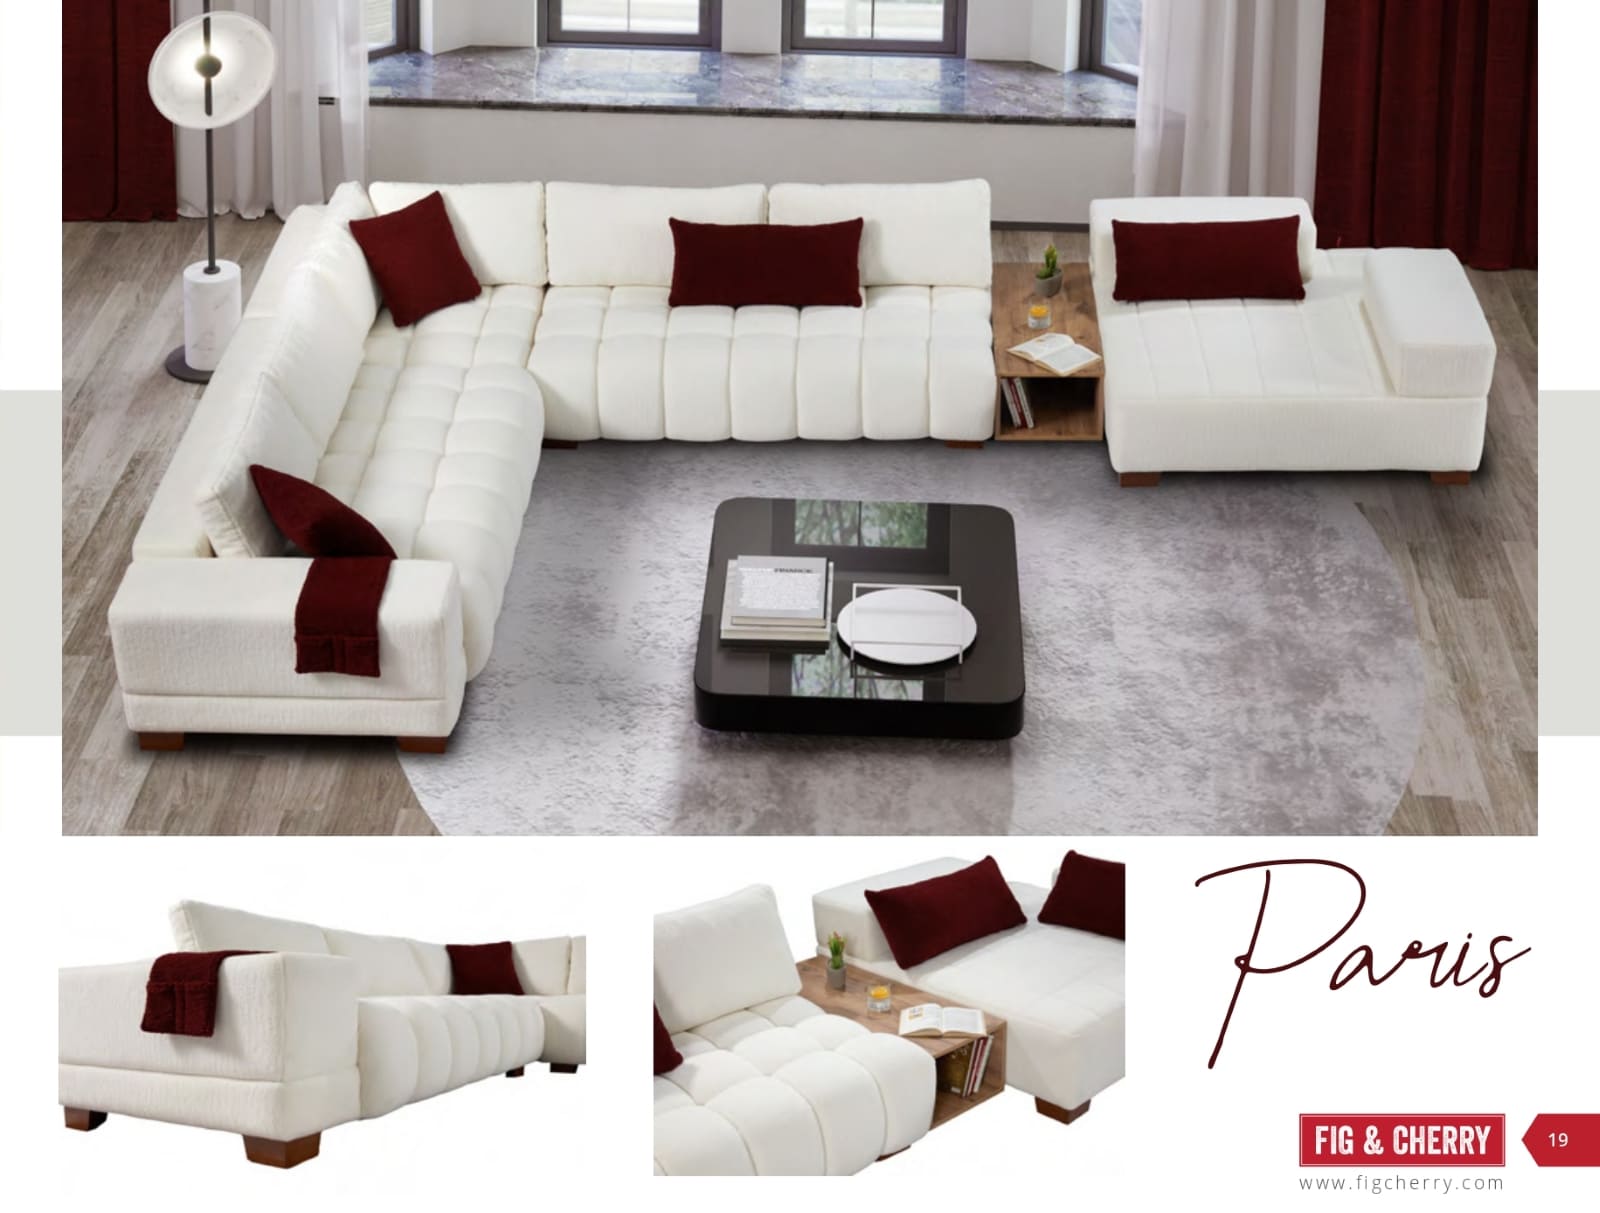 Fig & Cherry Indoor Collection (Sofas and Sectionals) Catalog (19)